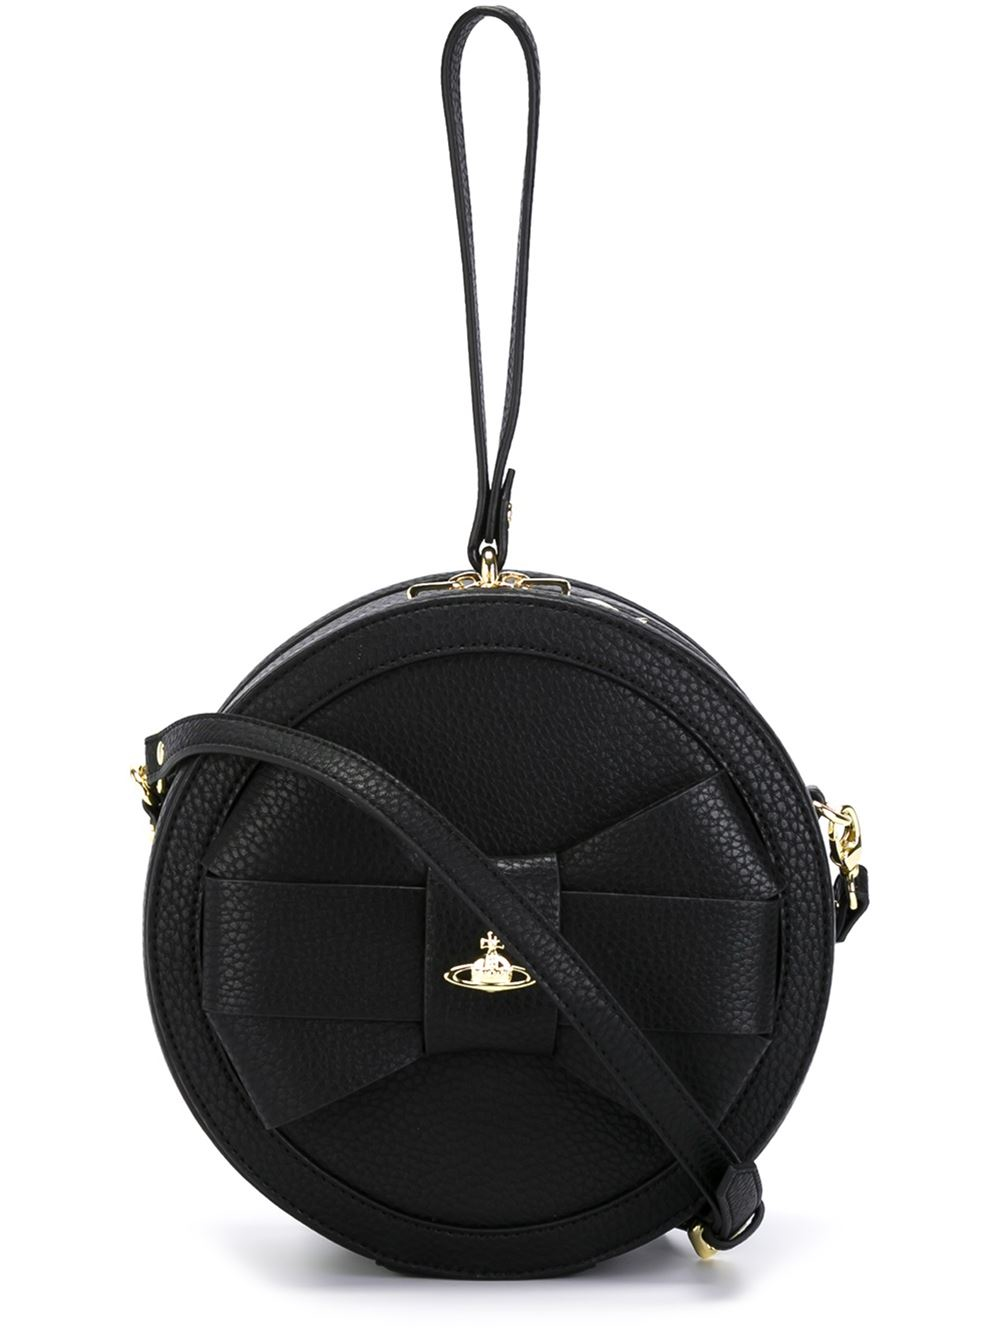 Vivienne westwood anglomania Round Shape Cross Body Bag in Black | Lyst